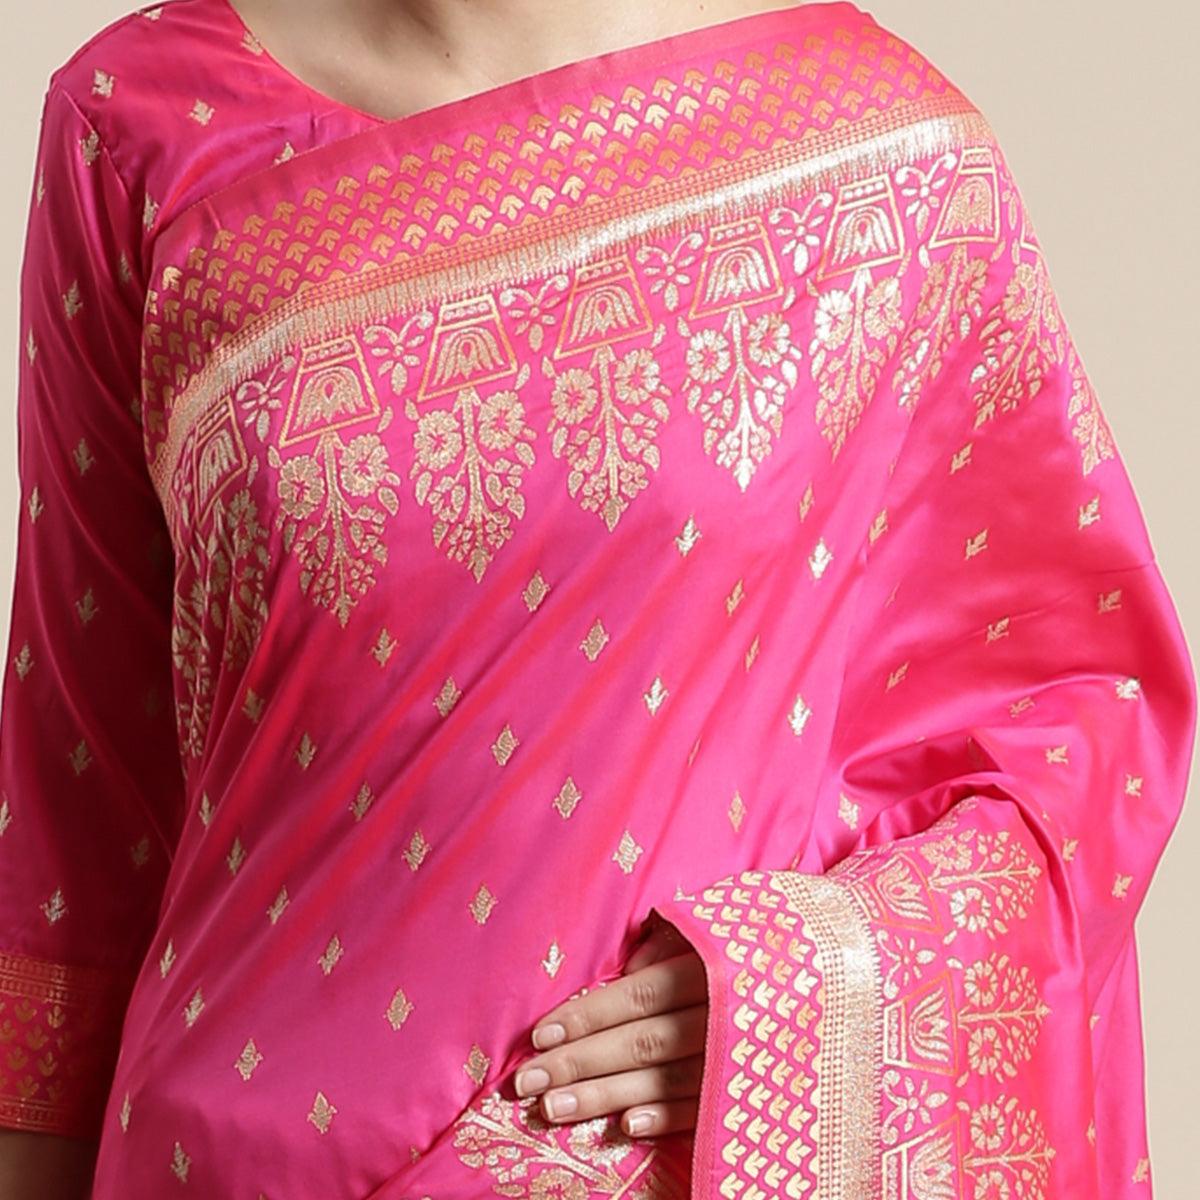 Lovely Pink Colored Festive Wear Silk Blend Woven Floral Saree With Tassels - Peachmode